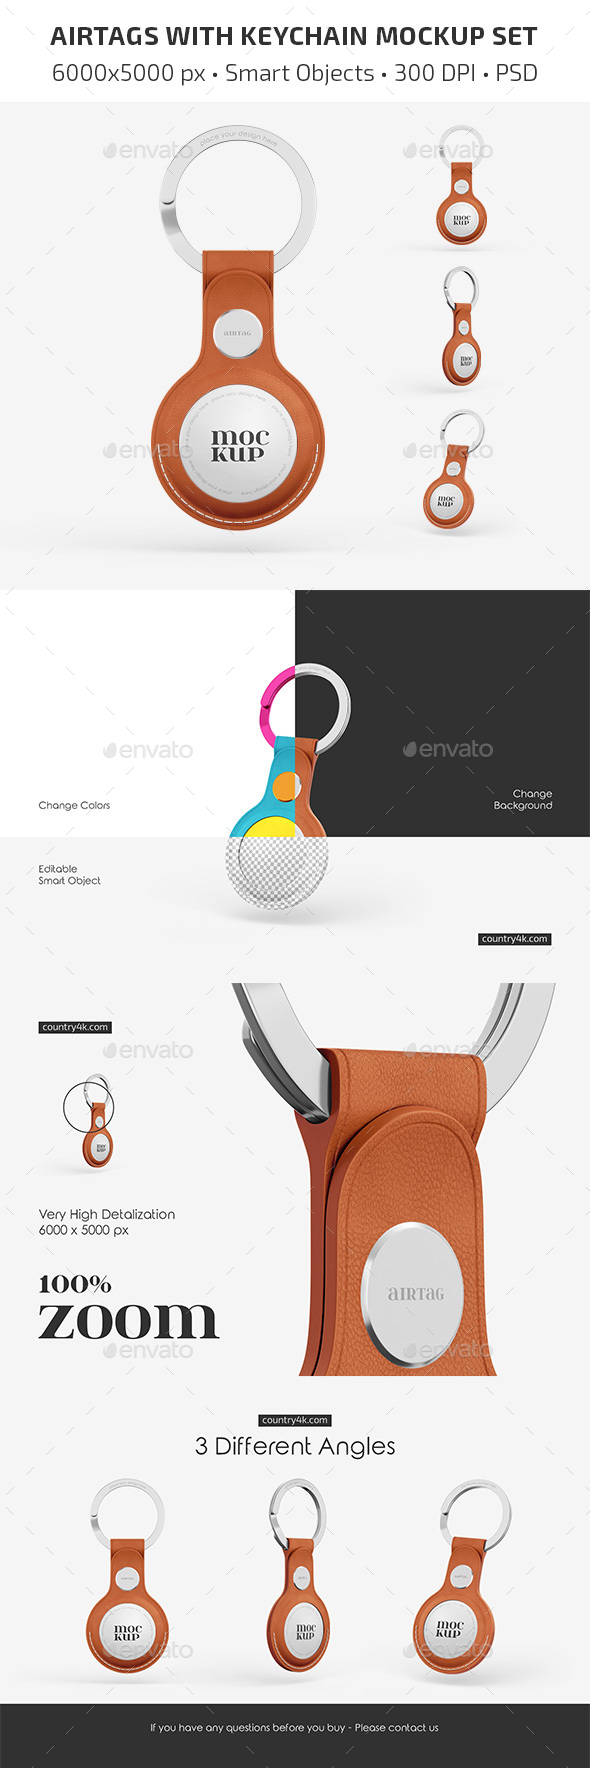 [DOWNLOAD]AirTags with Keychain Mockup Set